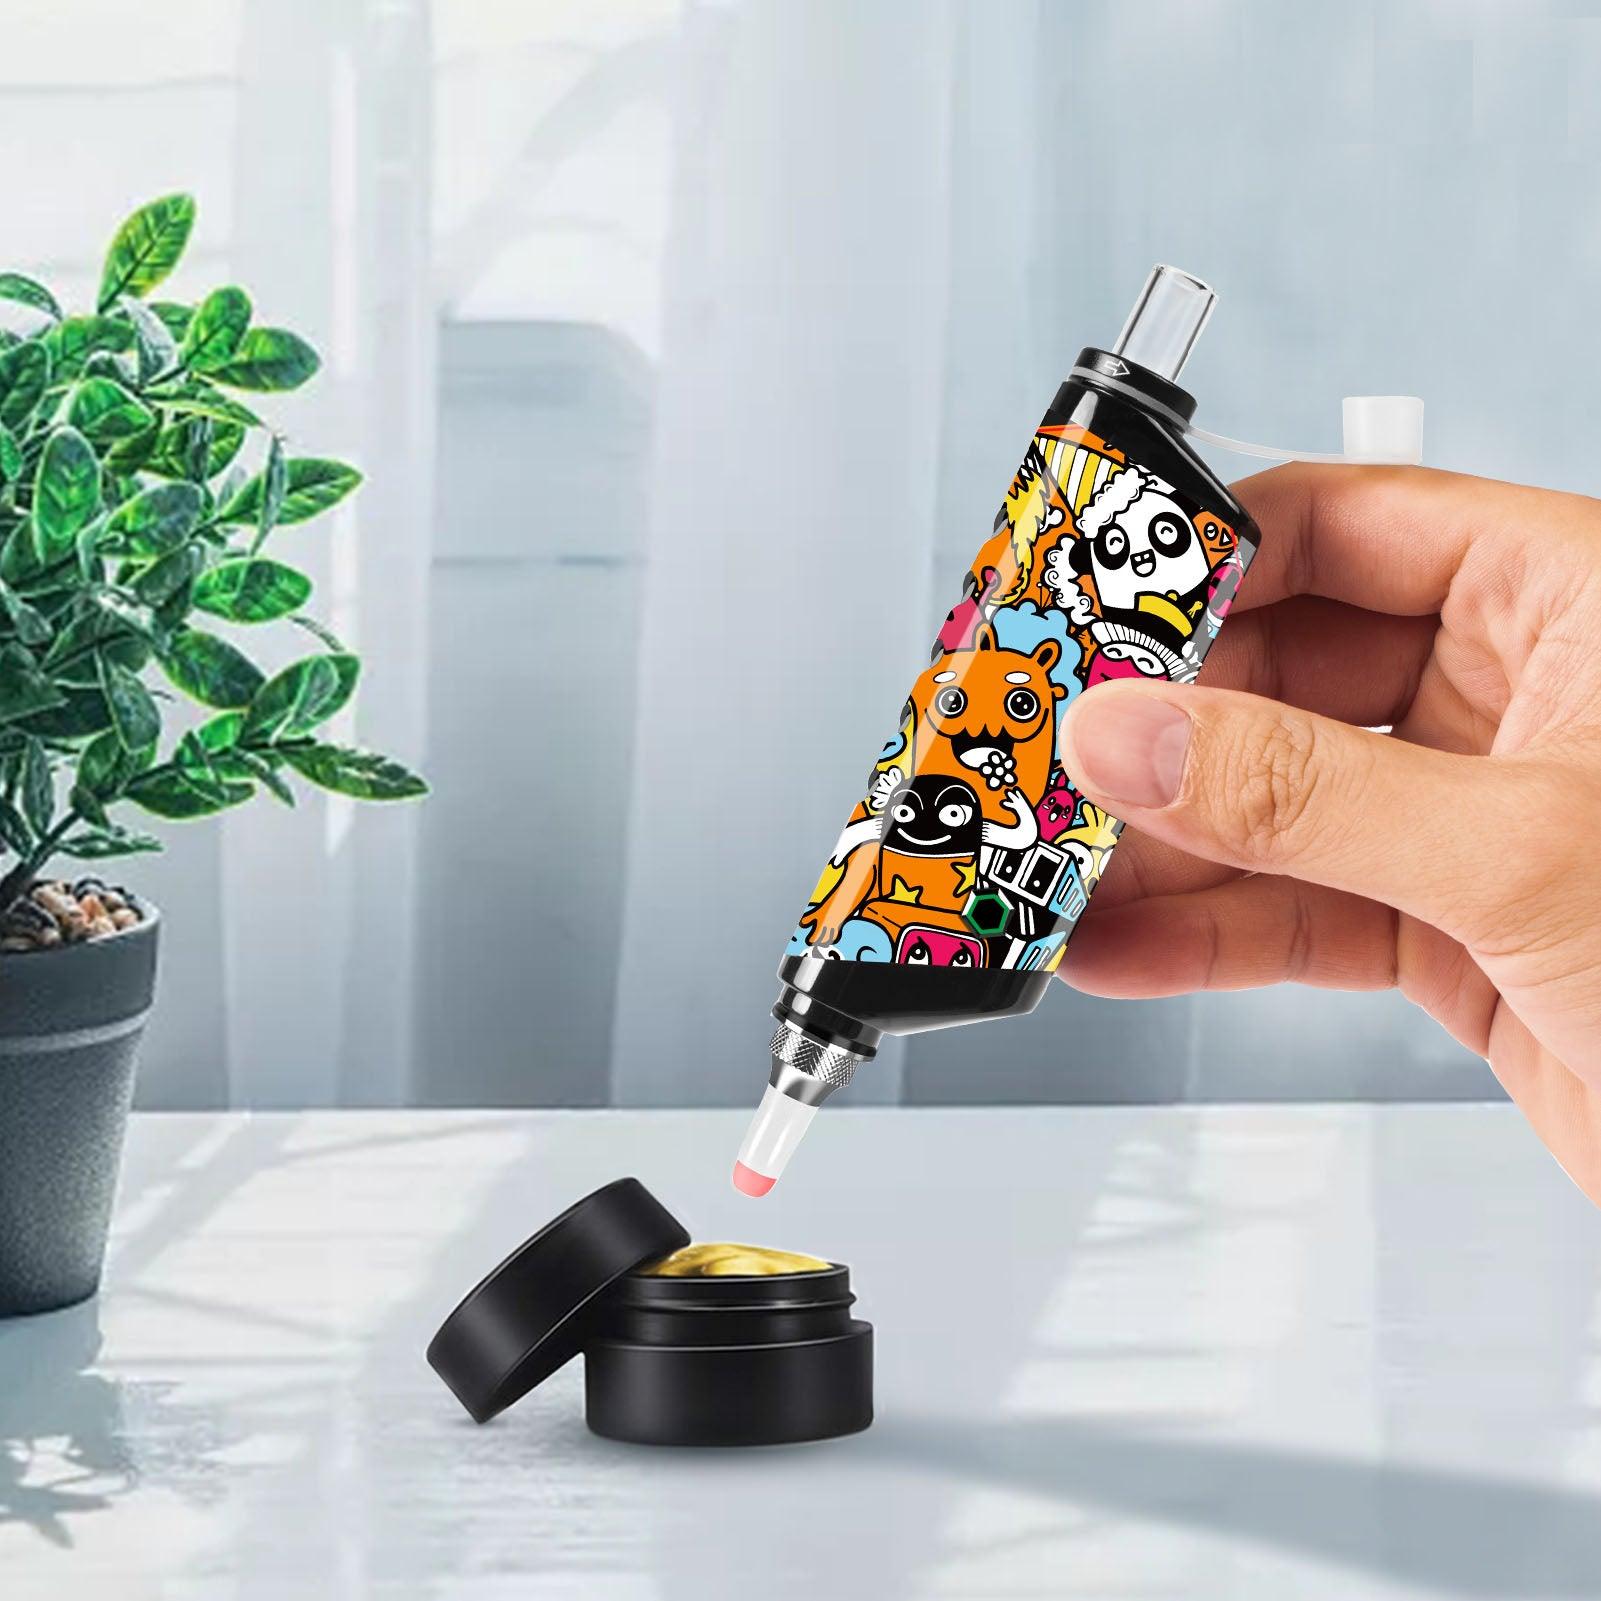 IECIGBEST COZZY Electric Nectar Collector,DAB Pen